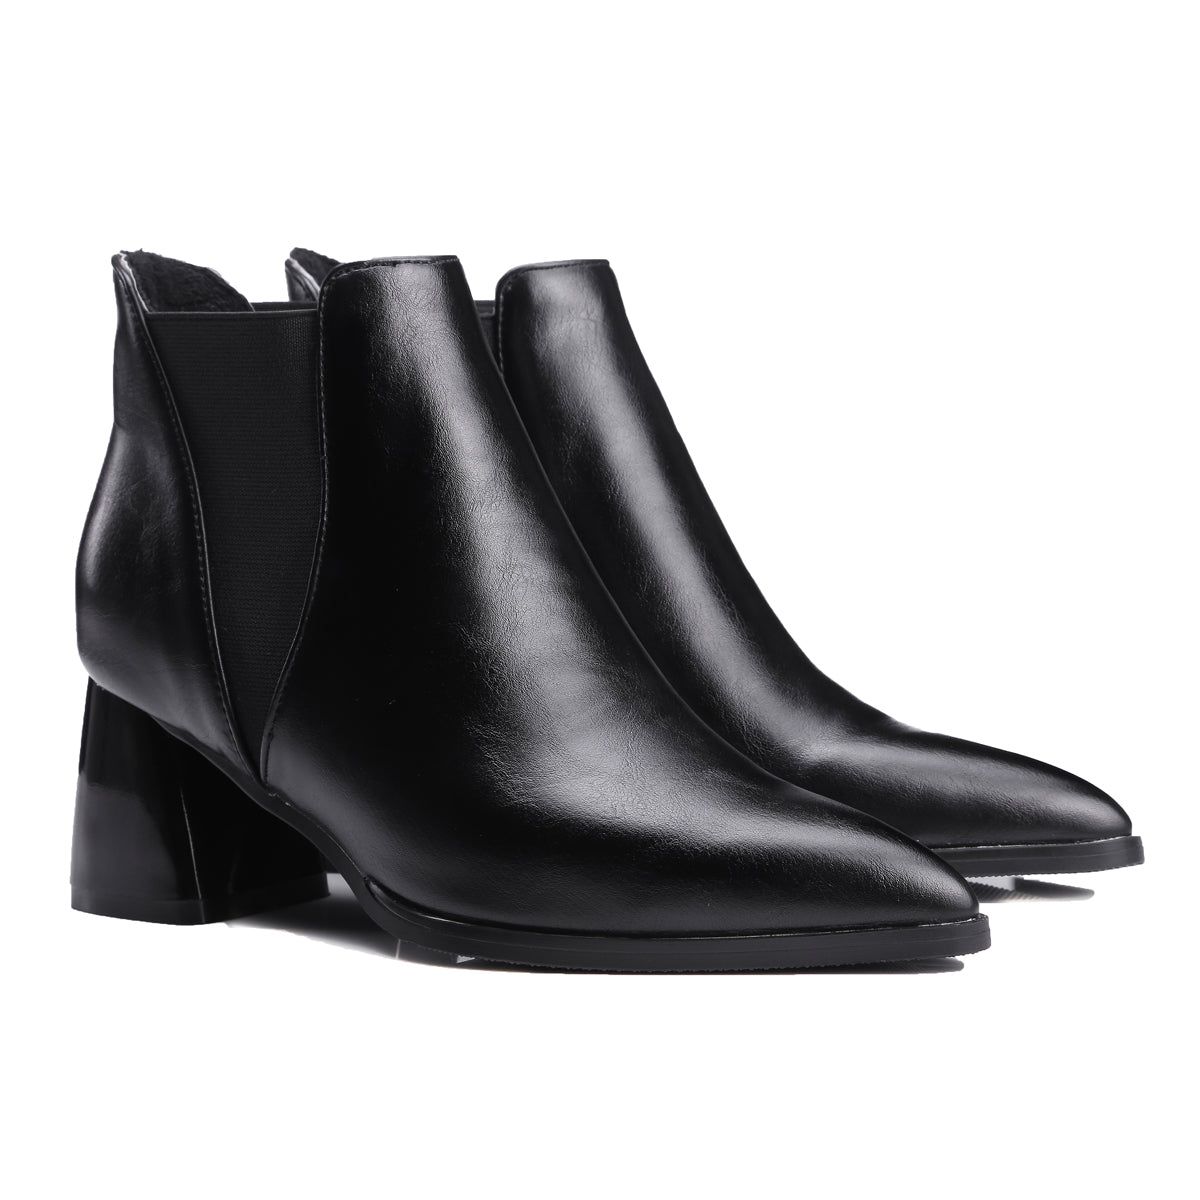 Bigsizeheels Mio magazine slip-on ankle boots with pointed toes - Black freeshipping - bigsizeheel®-size5-size15 -All Plus Sizes Available!